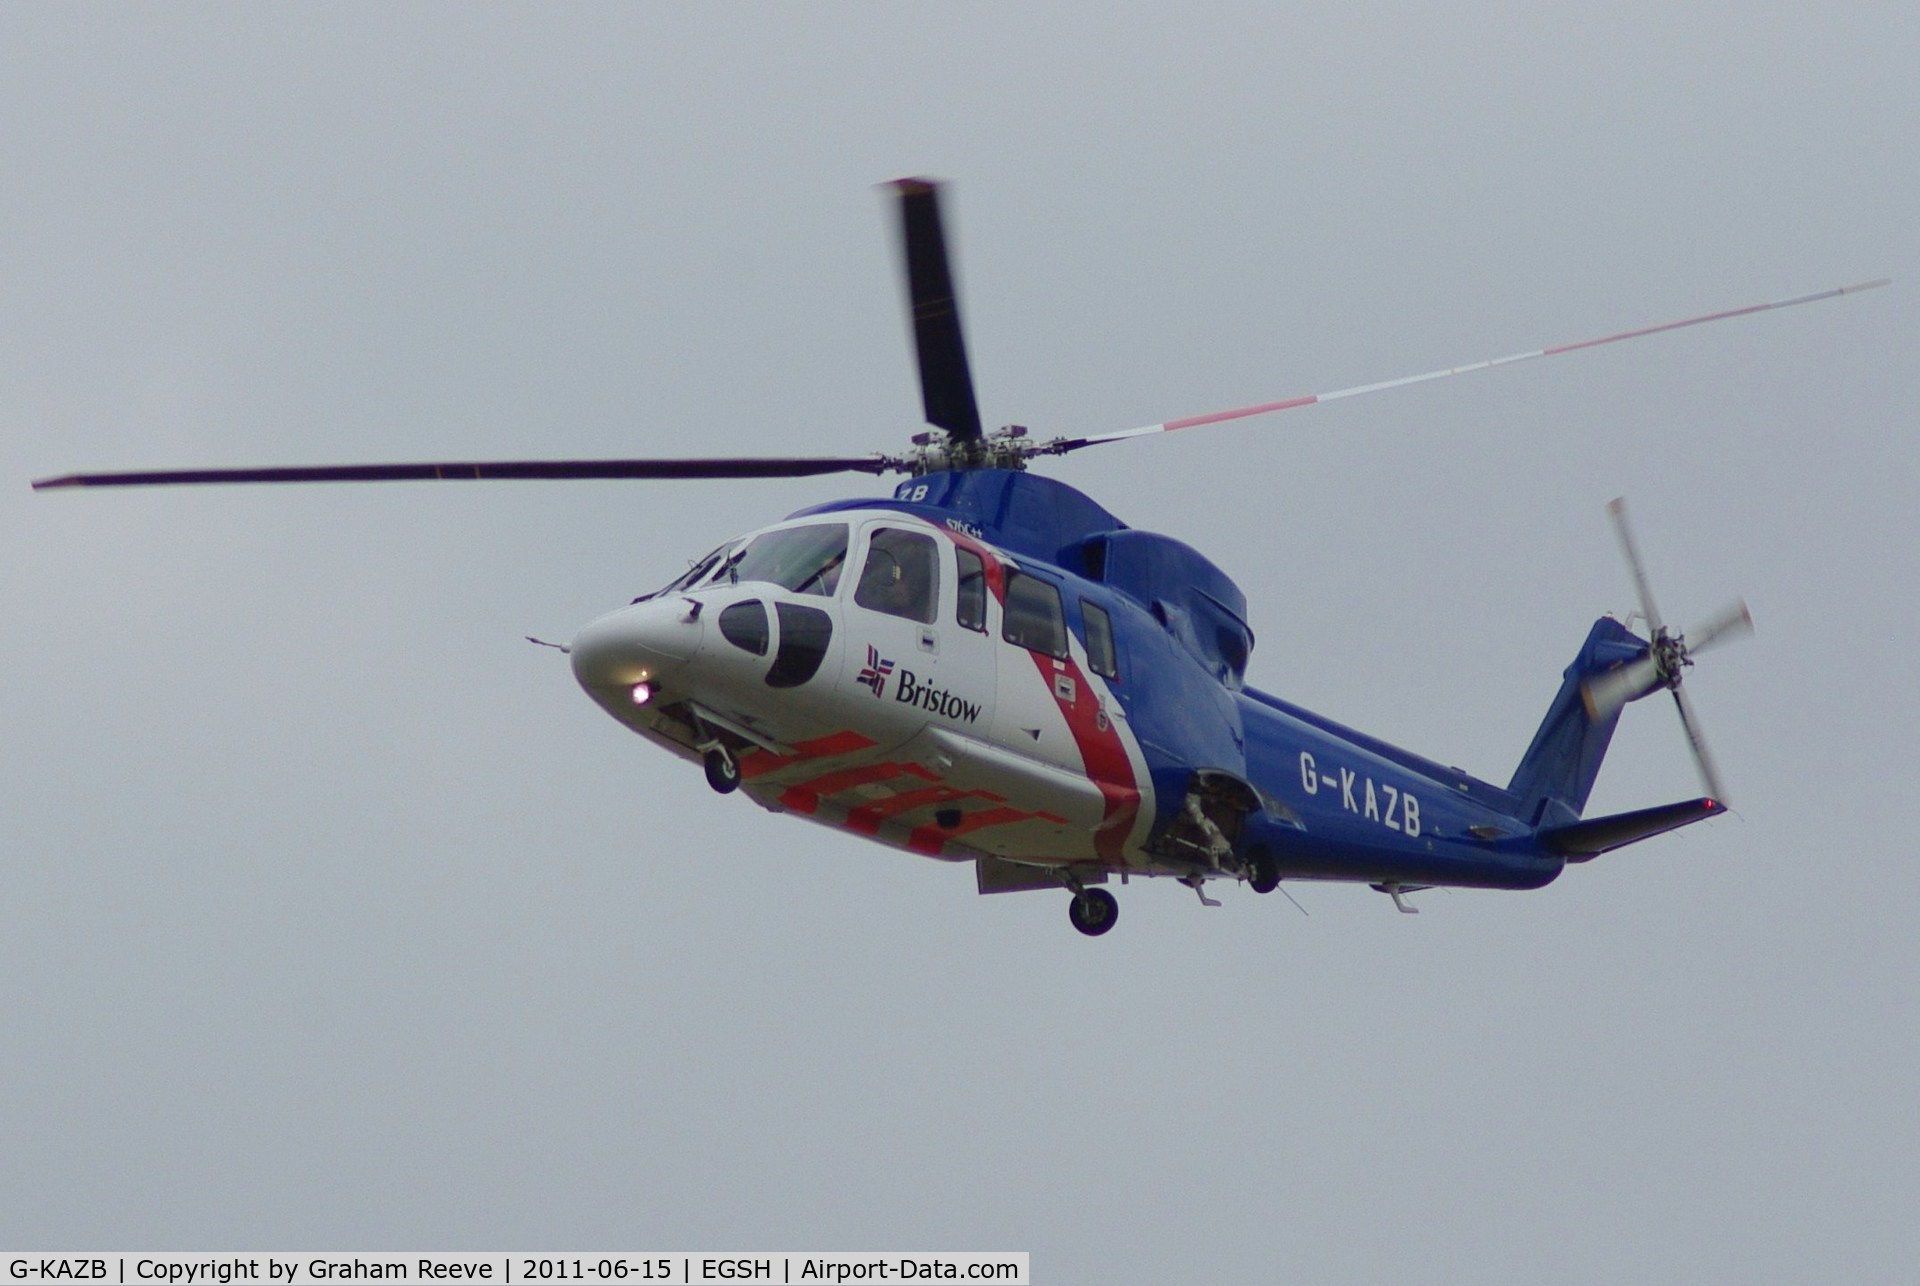 G-KAZB, 2006 Sikorsky S-76C C/N 760614, Departing from Norwich.